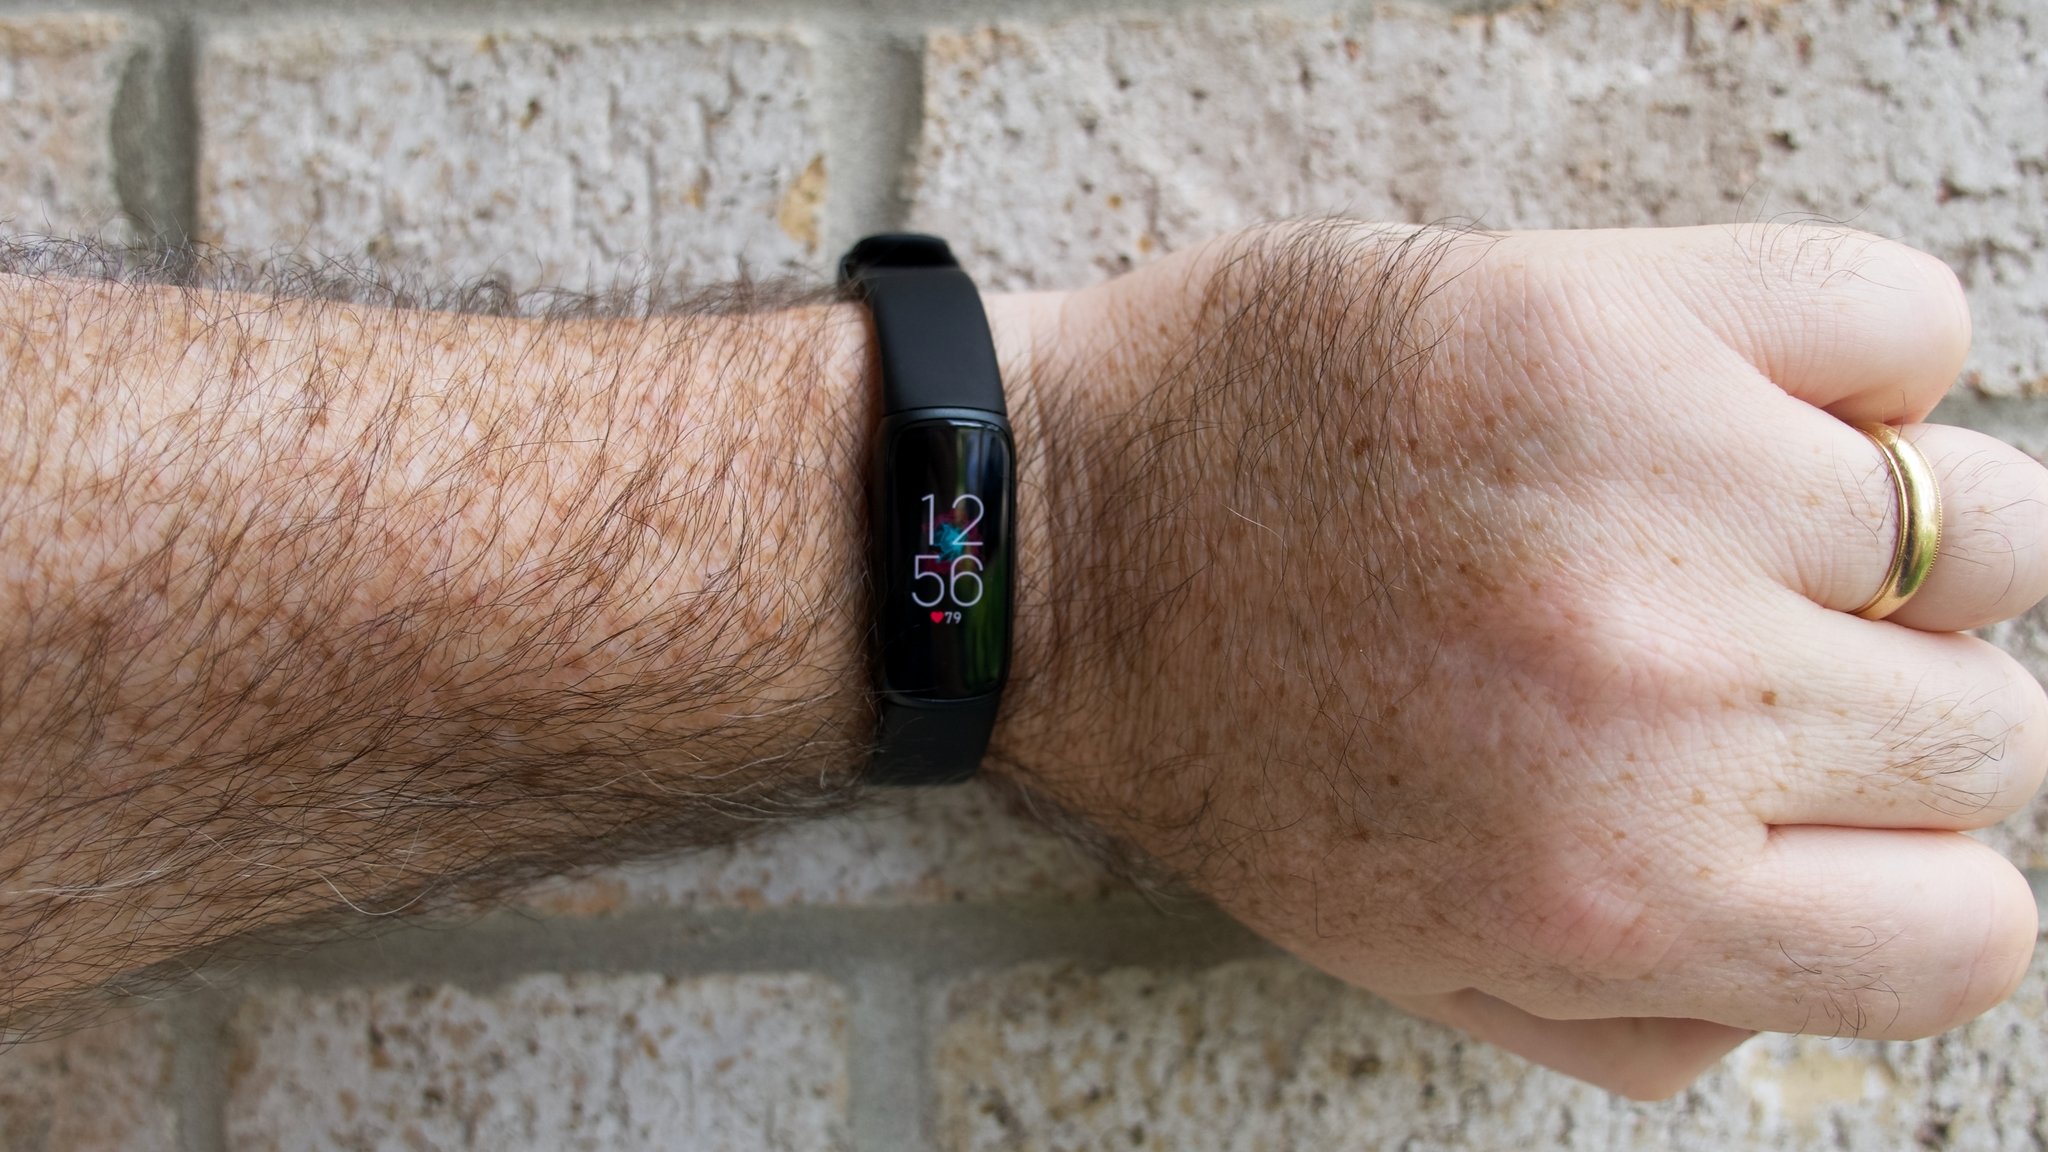 Fitbit Luxe 1